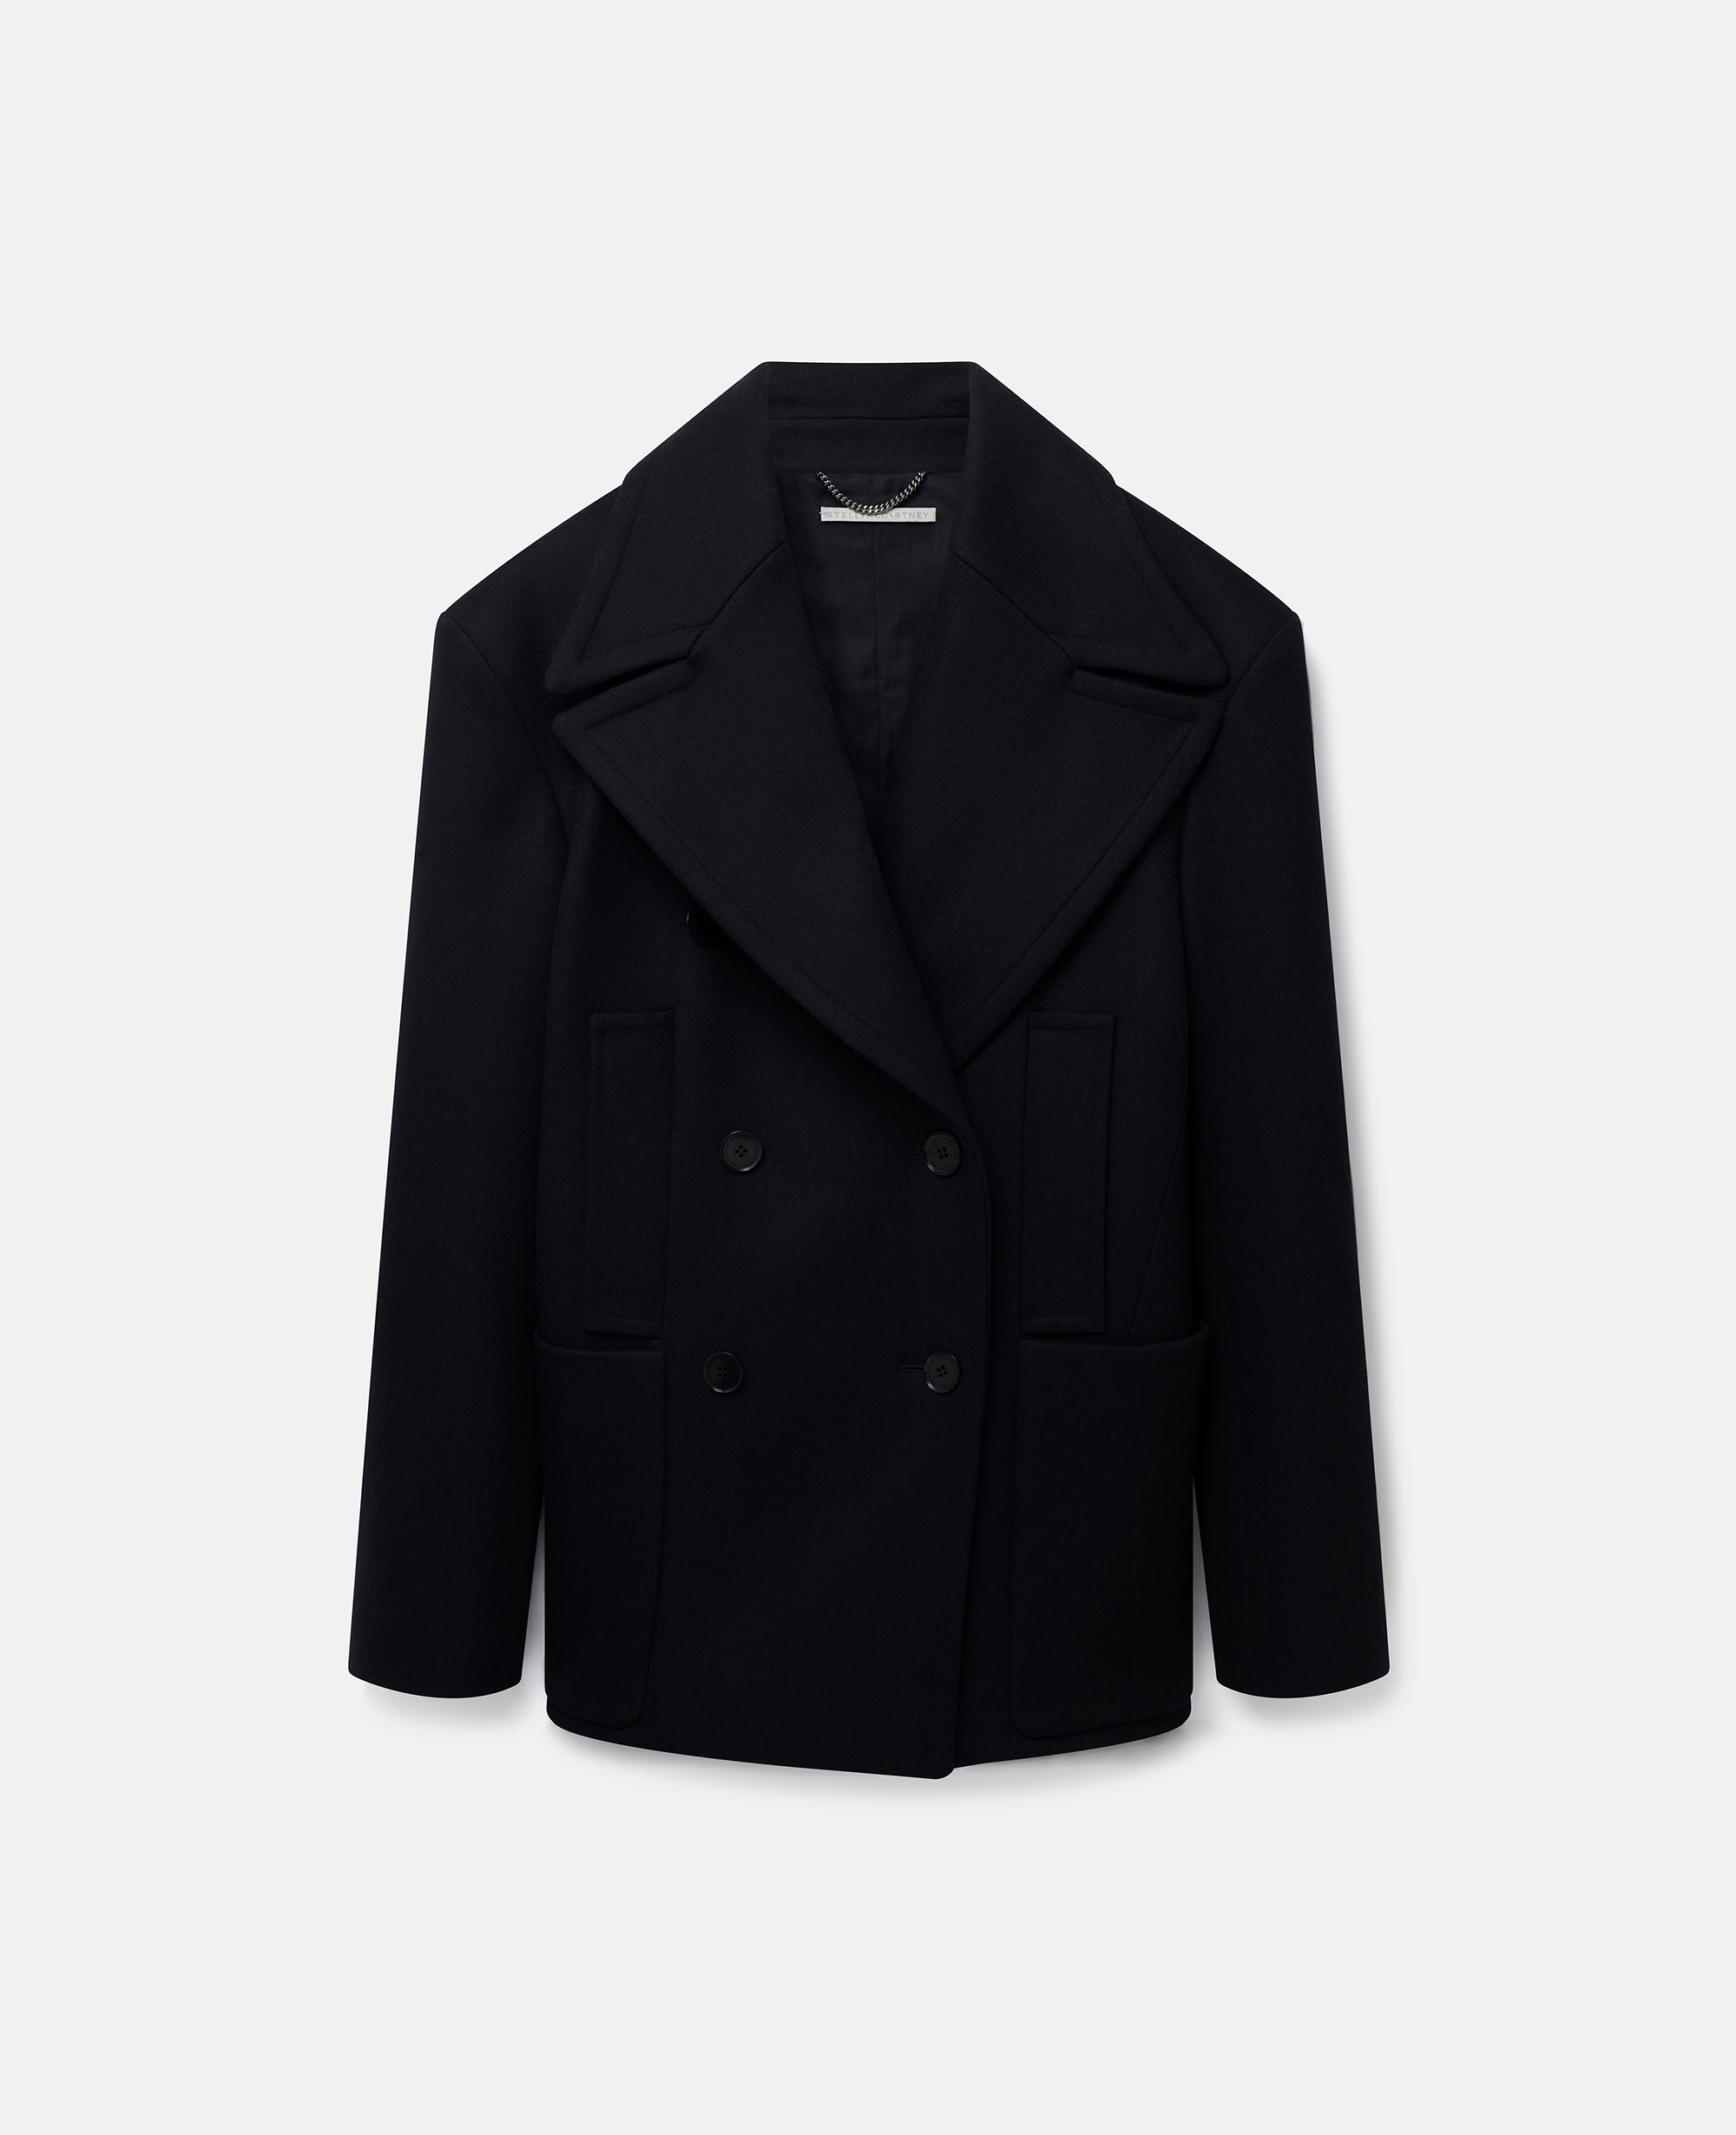 stella mccartney - double-breasted peacoat, woman, ink, size: 36